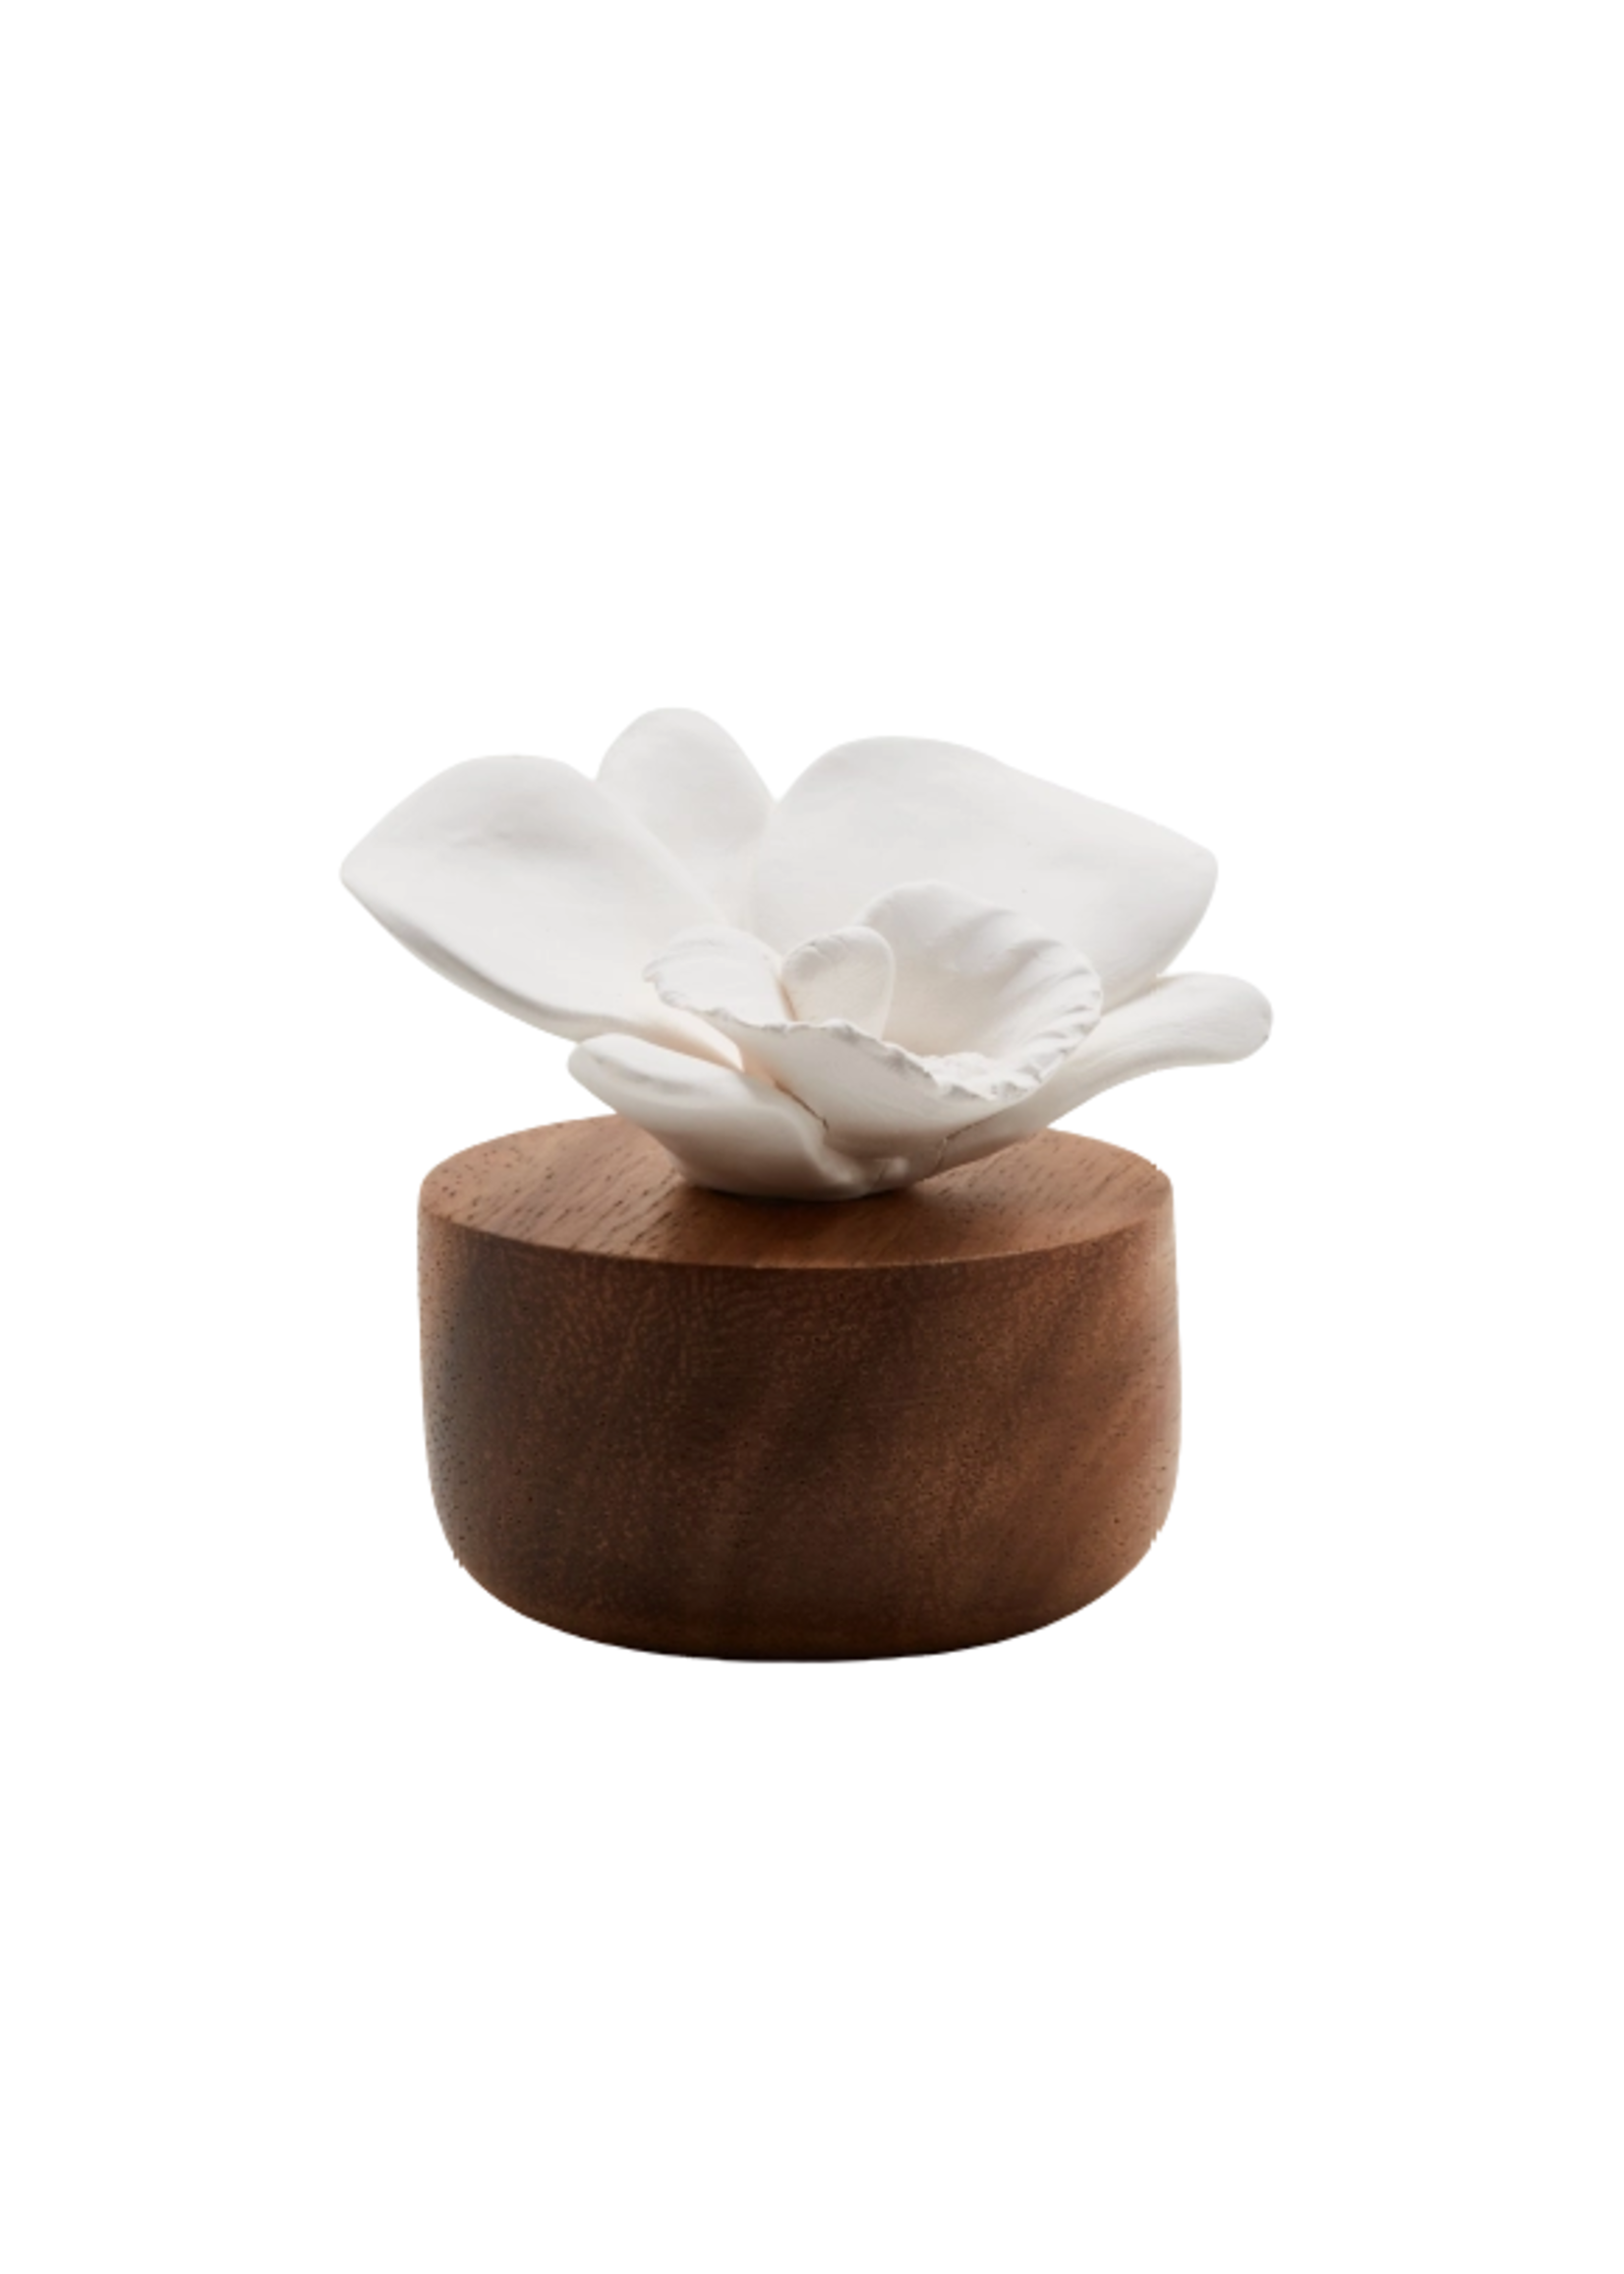 Anoq Oil Diffuser Handmade Nepal Orchid White